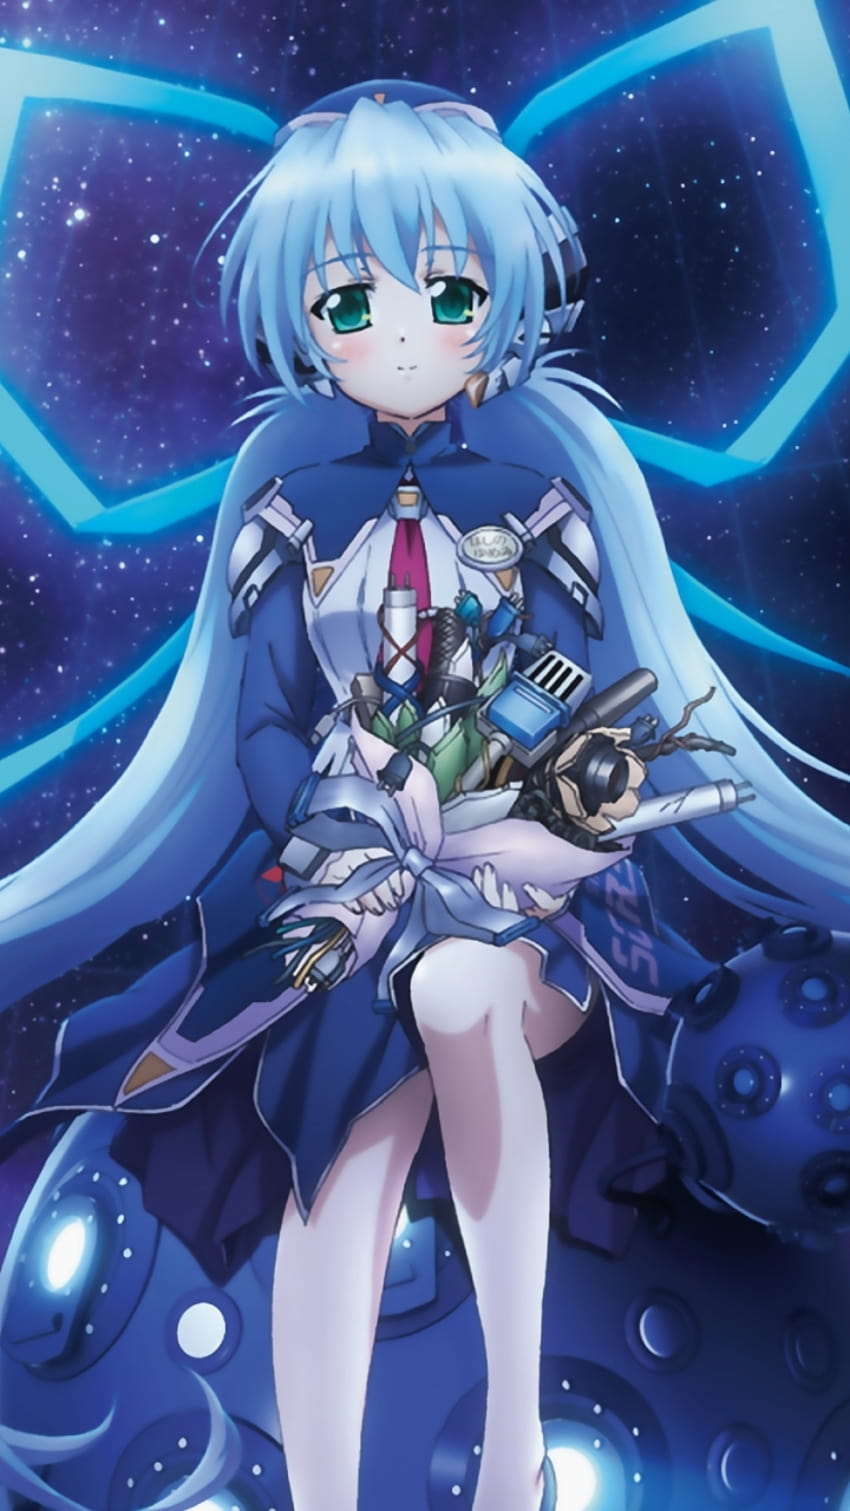 Wallpaper : anime girls, Planetarian The Reverie of A Little Planet,  Hoshino Yumemi, picture in picture, Raidy hd 1920x1080 - smreko - 1390885 -  HD Wallpapers - WallHere